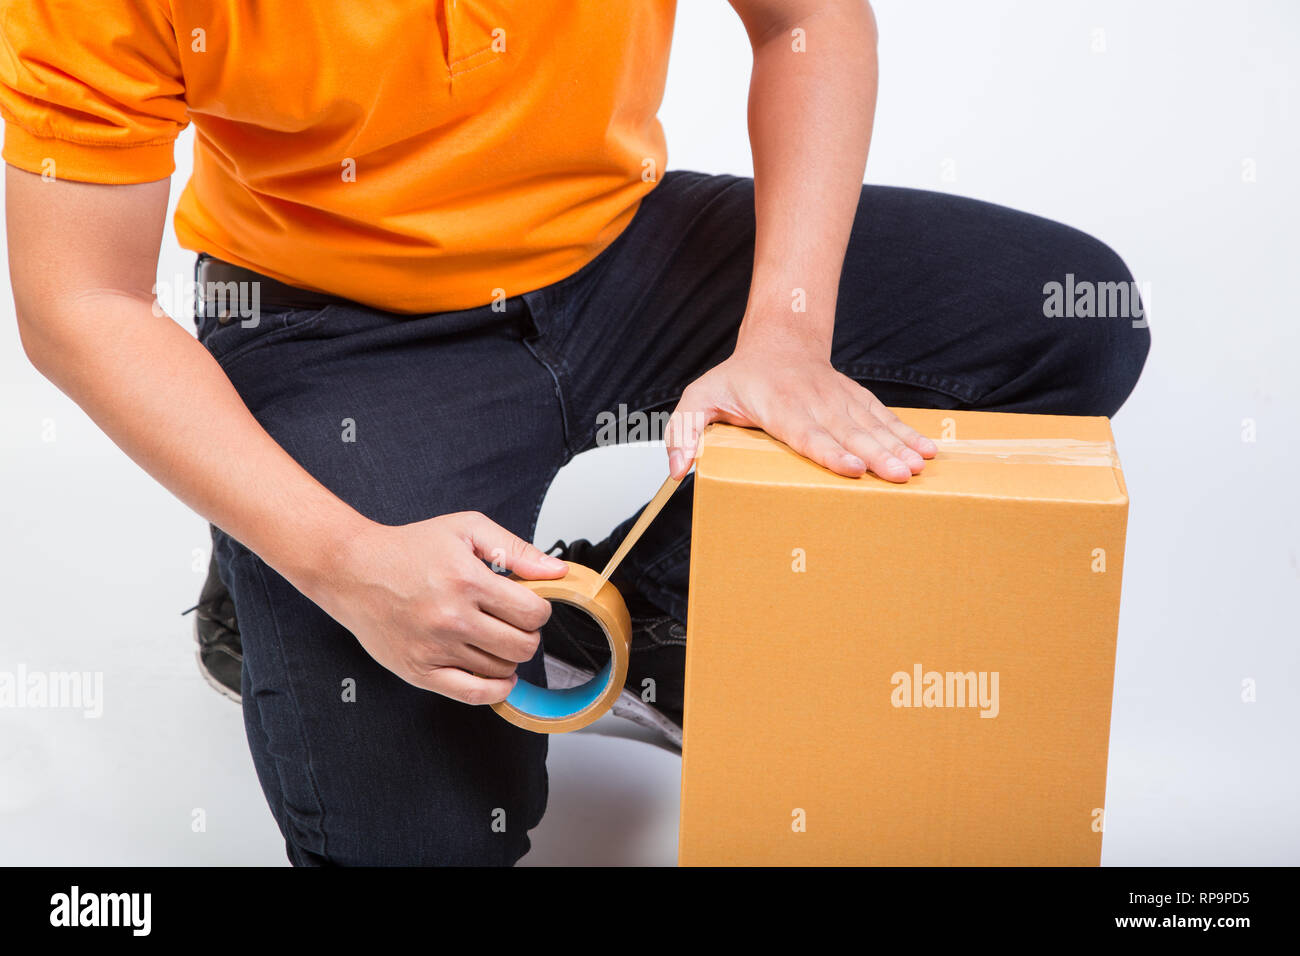 man packing box cardboard package sealing with brown tape move or shipping delivery concept isolated on white background Stock Photo